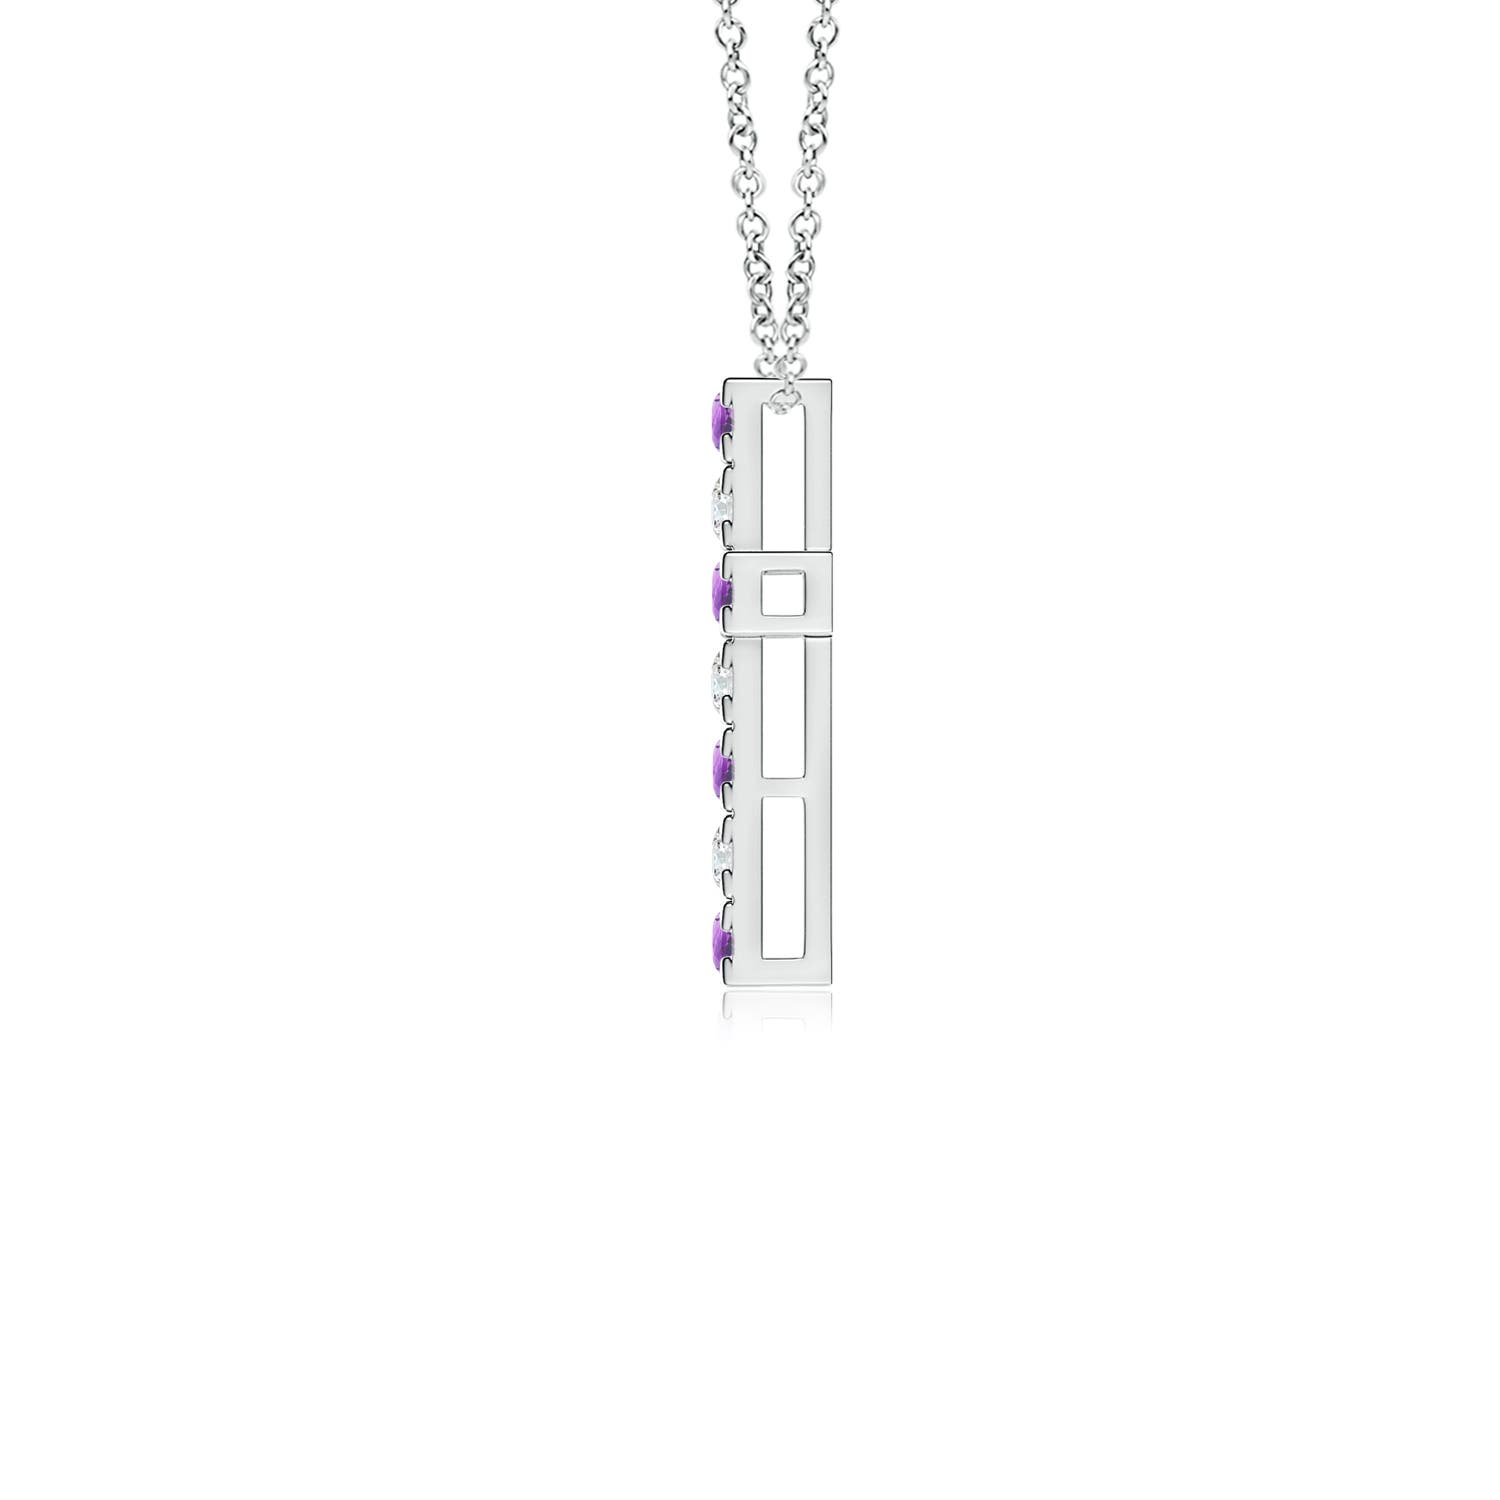 A - Amethyst / 0.36 CT / 14 KT White Gold